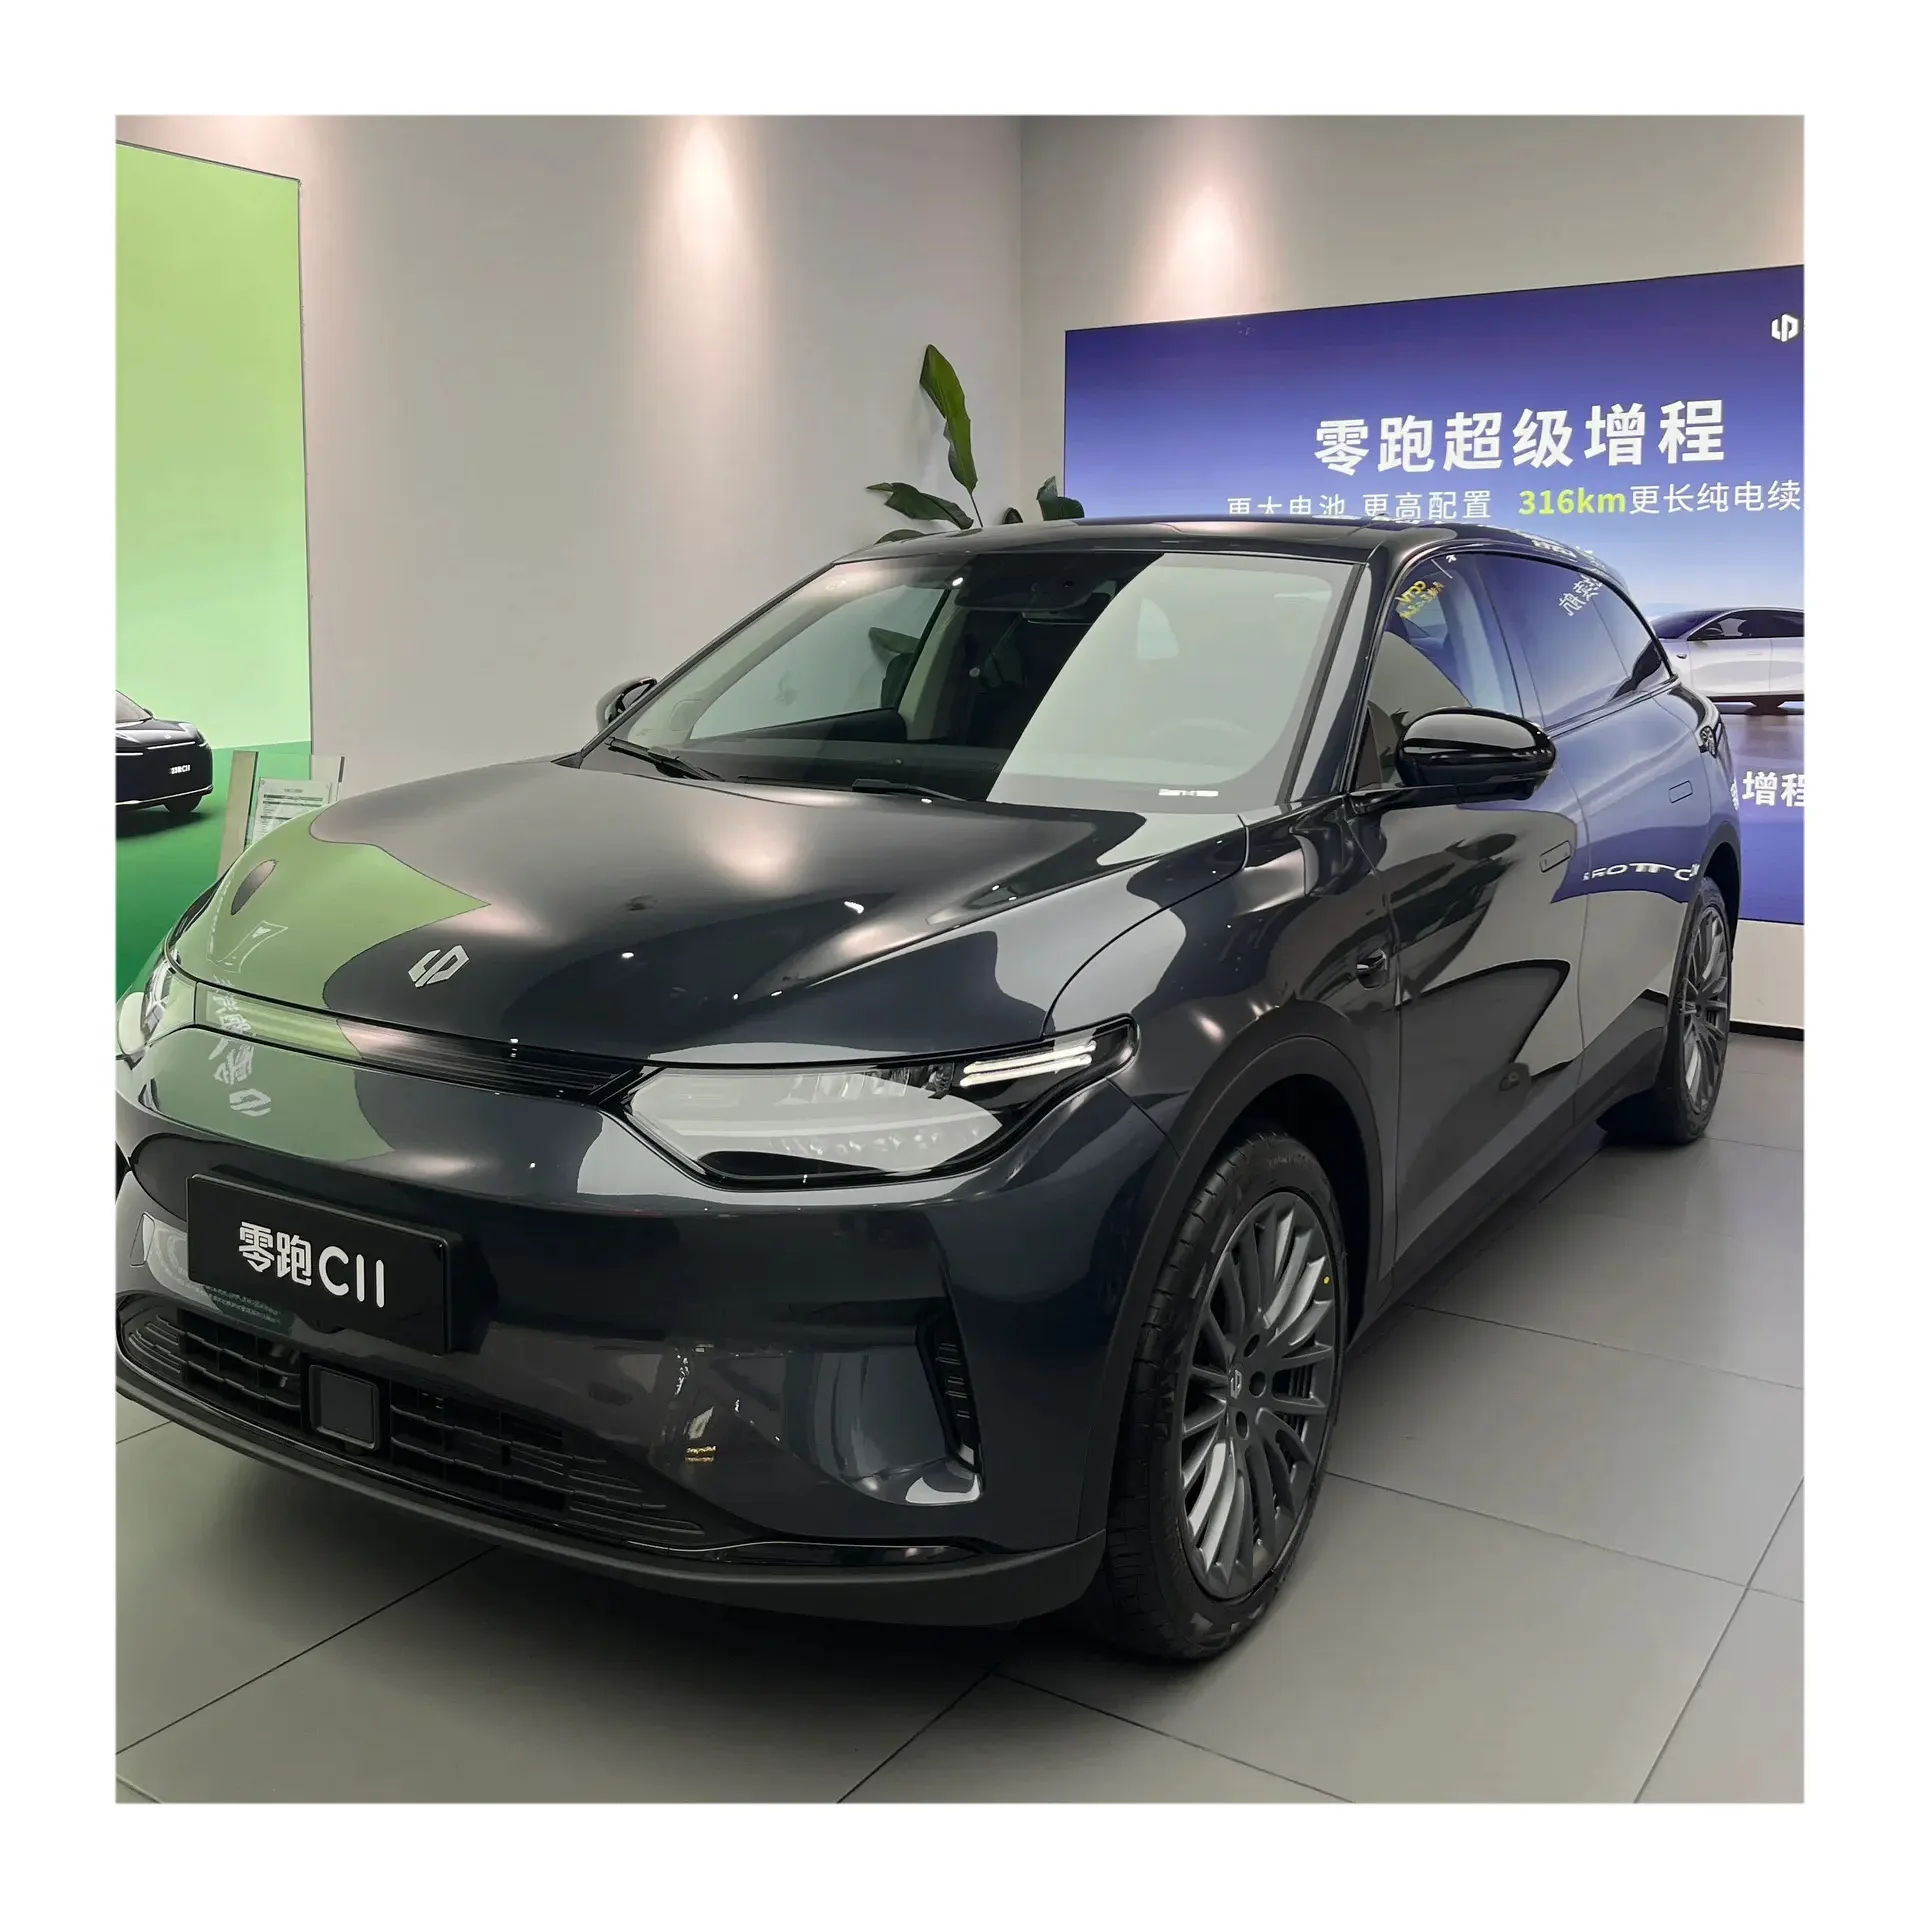 Leapmotor C11 Smart Edition High Speed 5 Door 5 Seater Electric Car Sports Leapmotor C11 4wd Electric Suv Cars